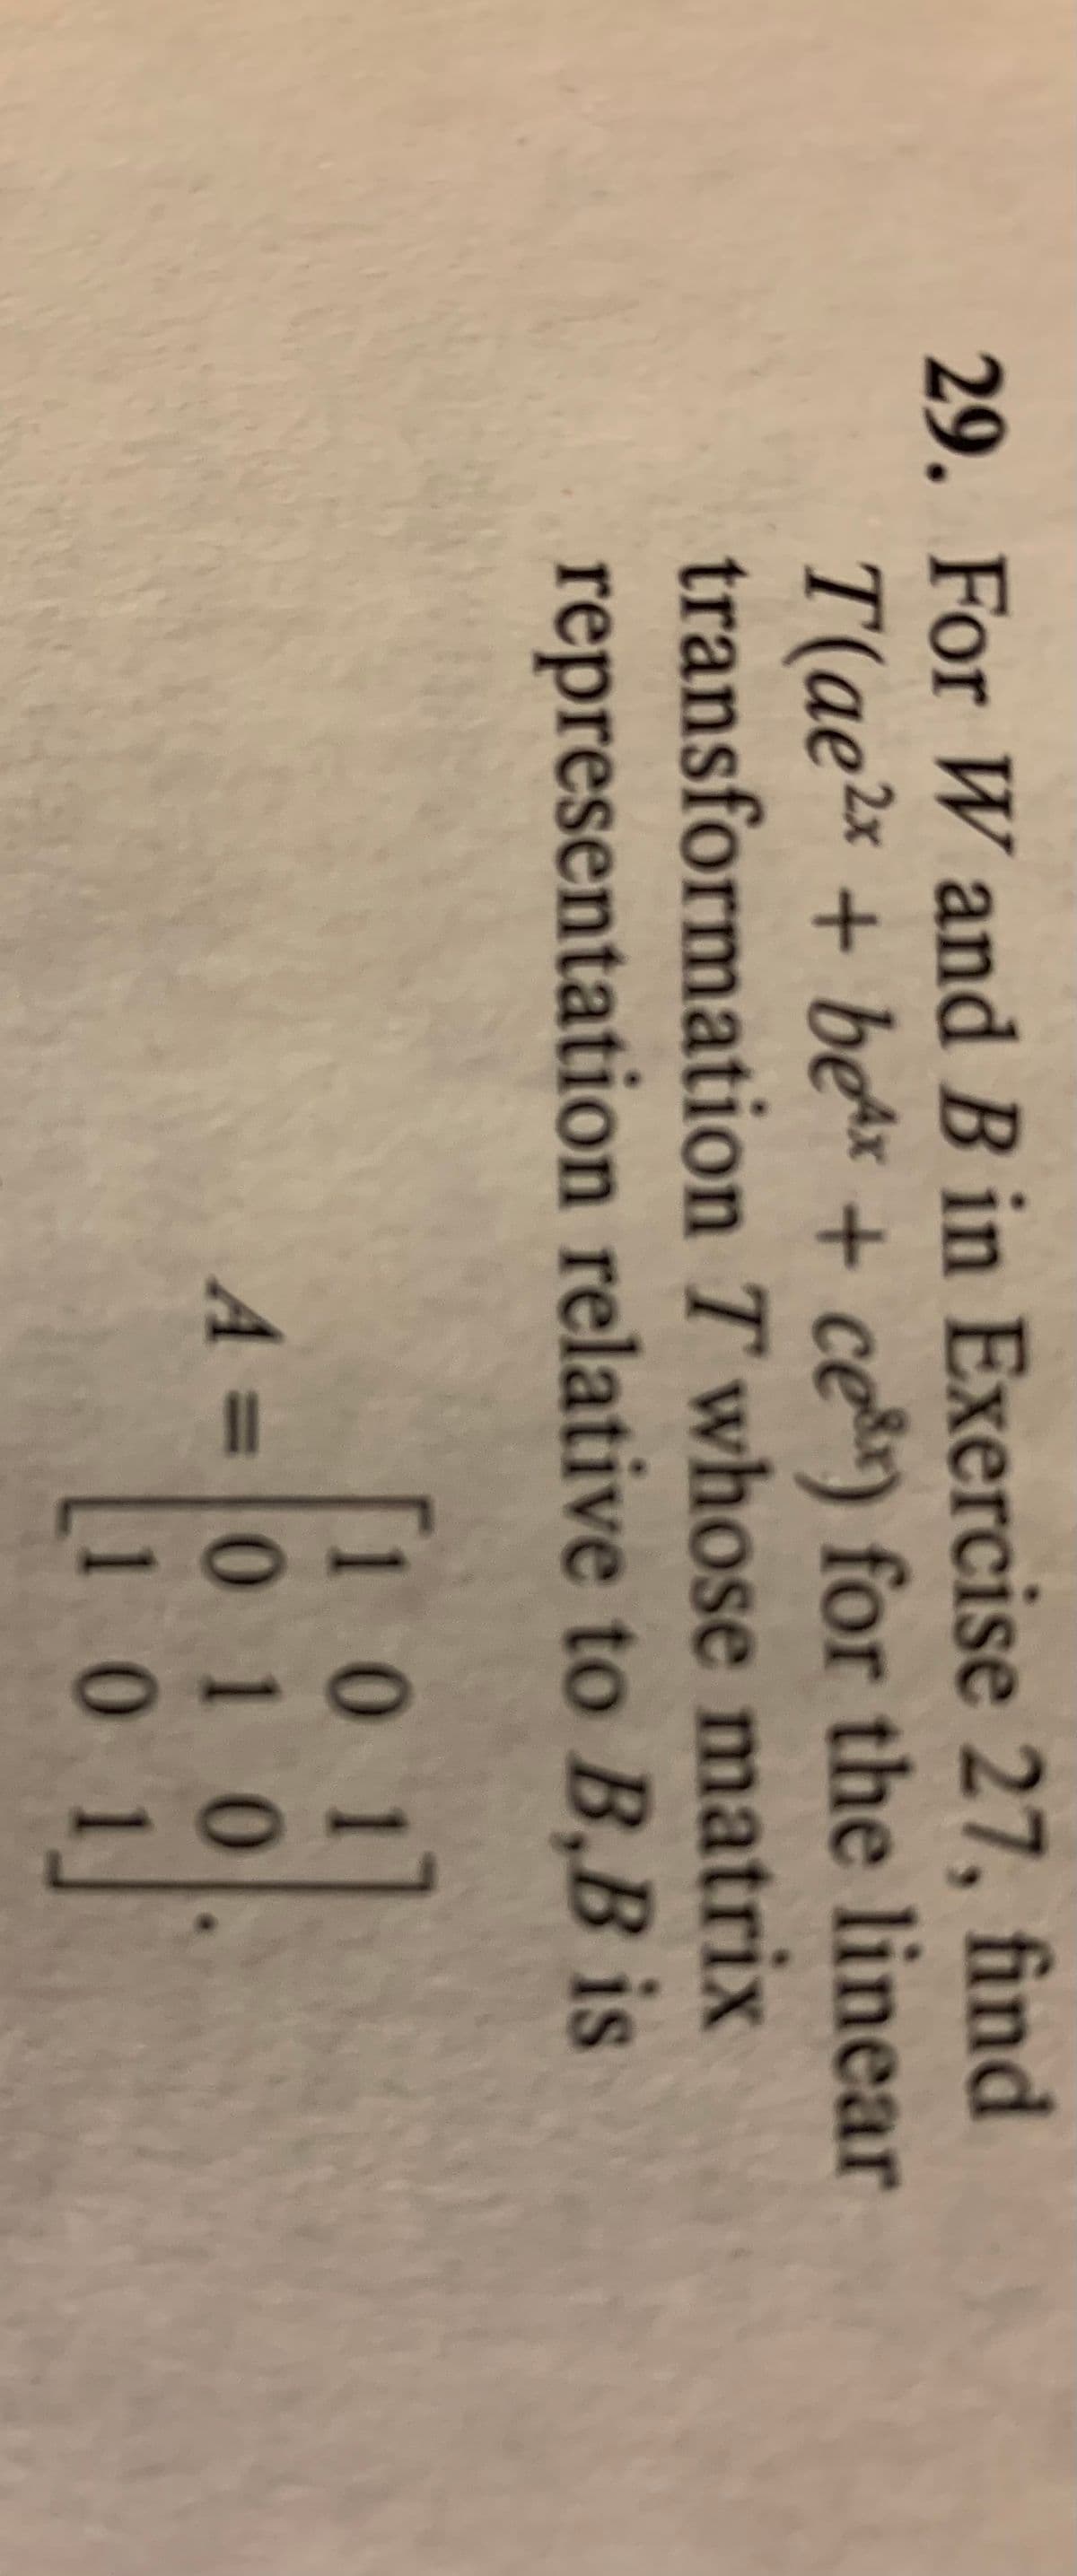 29. For W and B in Exercise 27, find
T(ae2x + bex + cer) for the linear
transformation T whose matrix
representation relative to B,B is
[101]
A=010
101